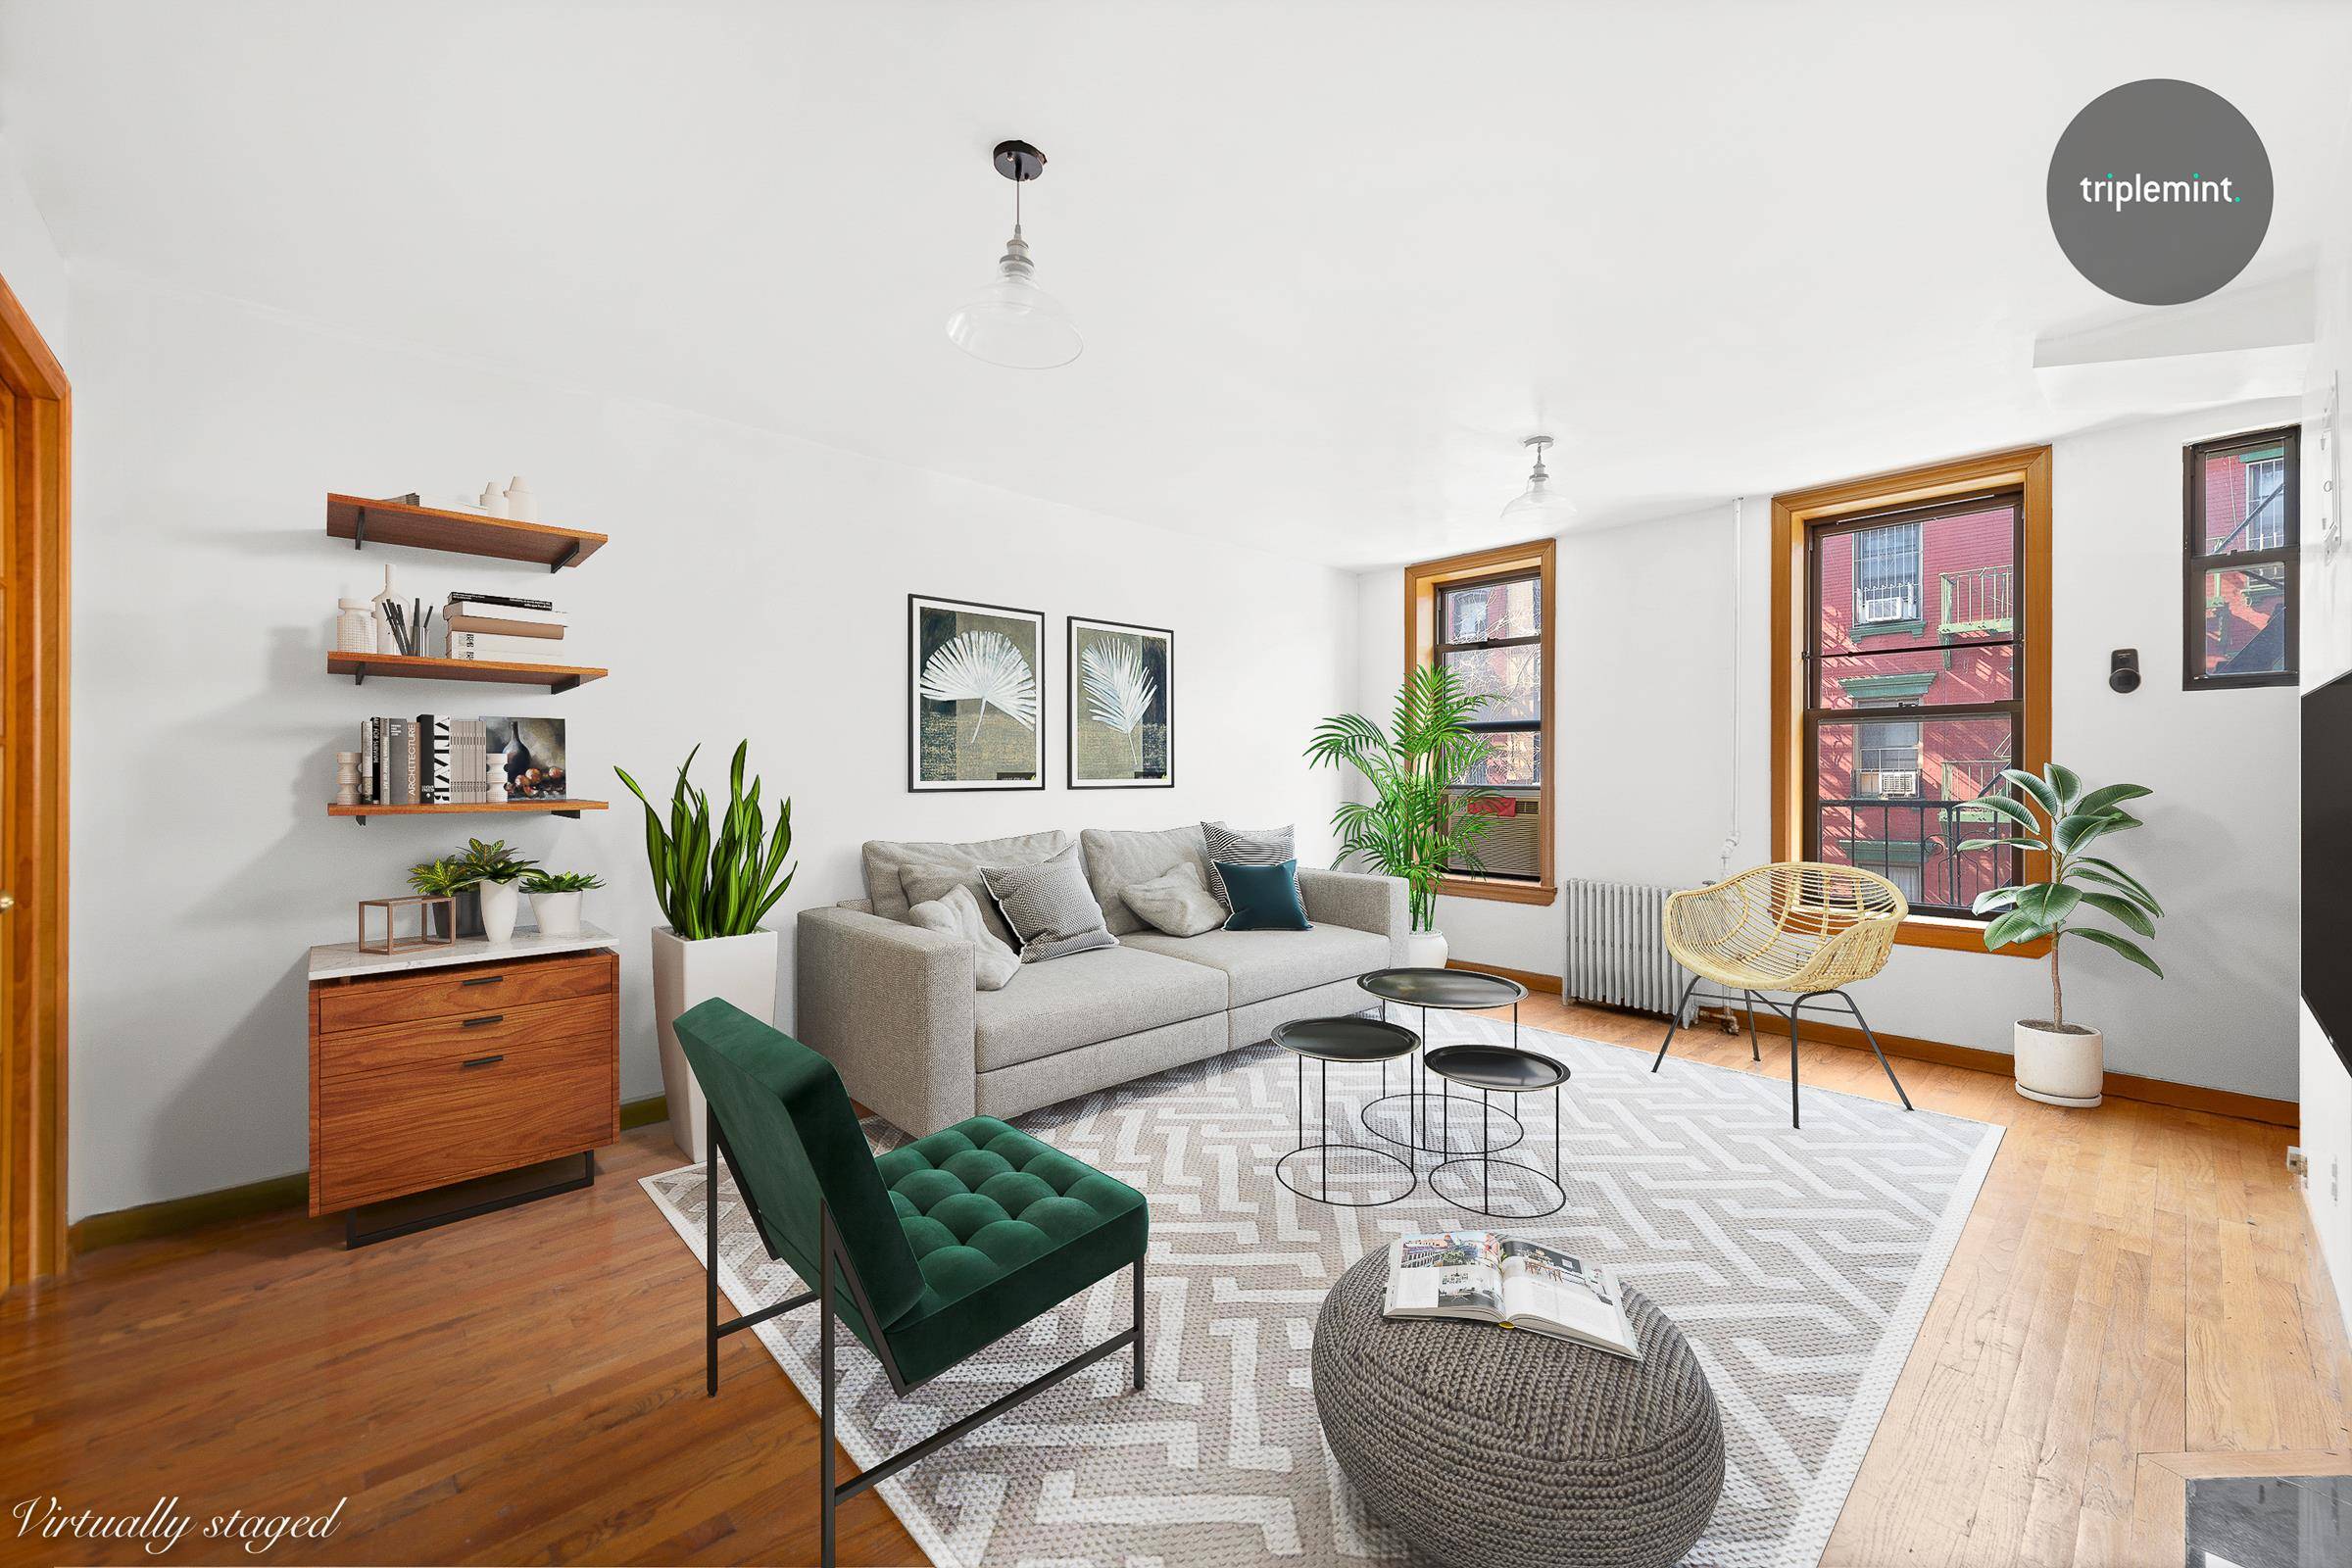 Come home to a rare gem on one of the most breathtaking tree lined blocks of vibrant Nolita.